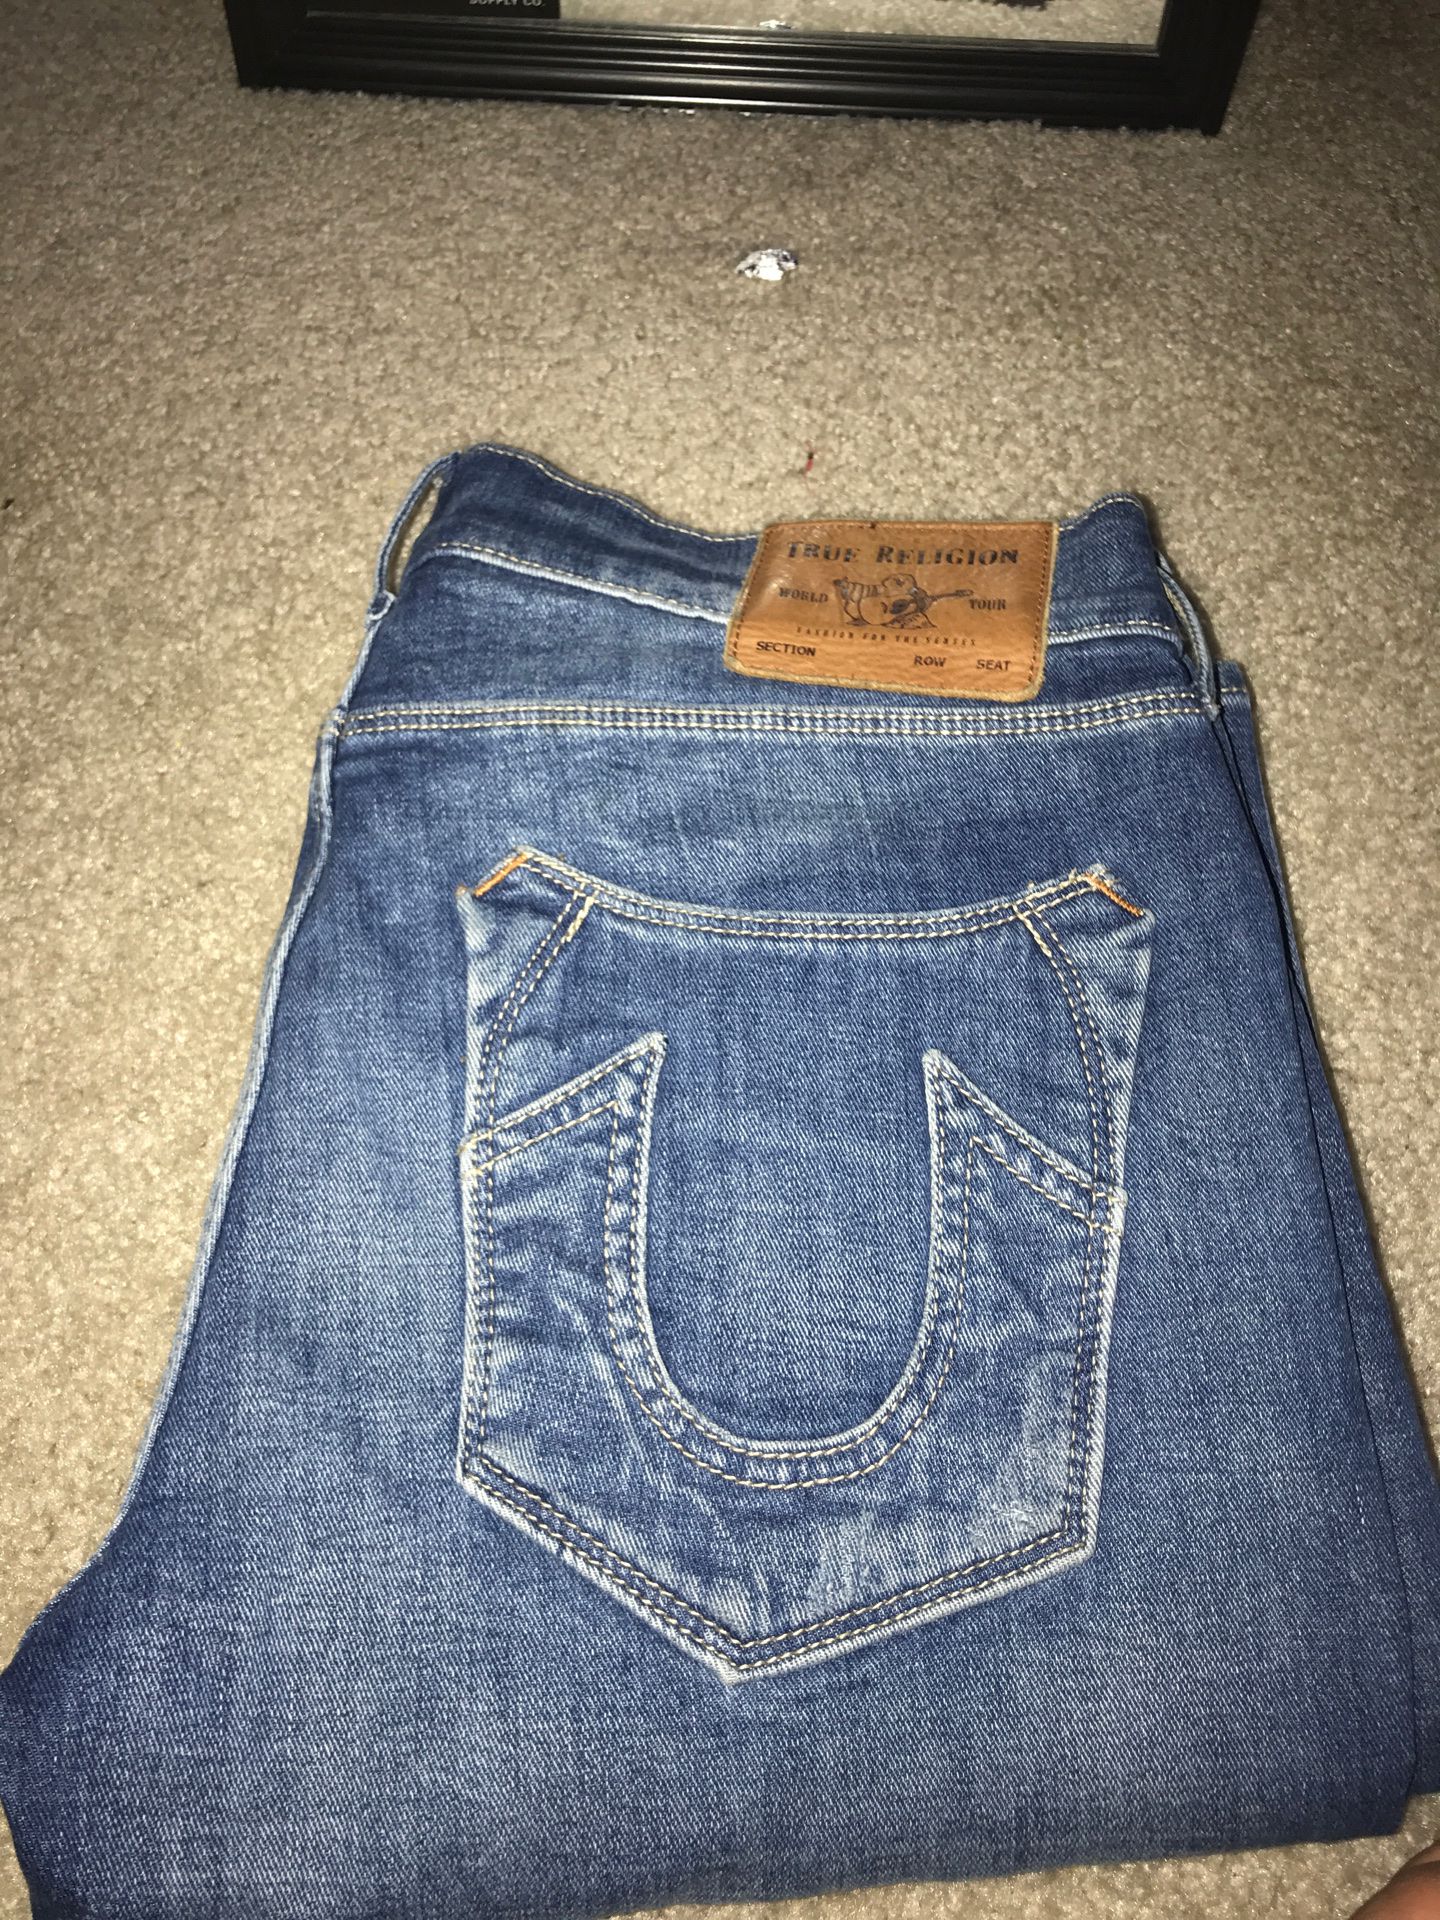 True religion relaxed slim straight 31x31 (special Ed)